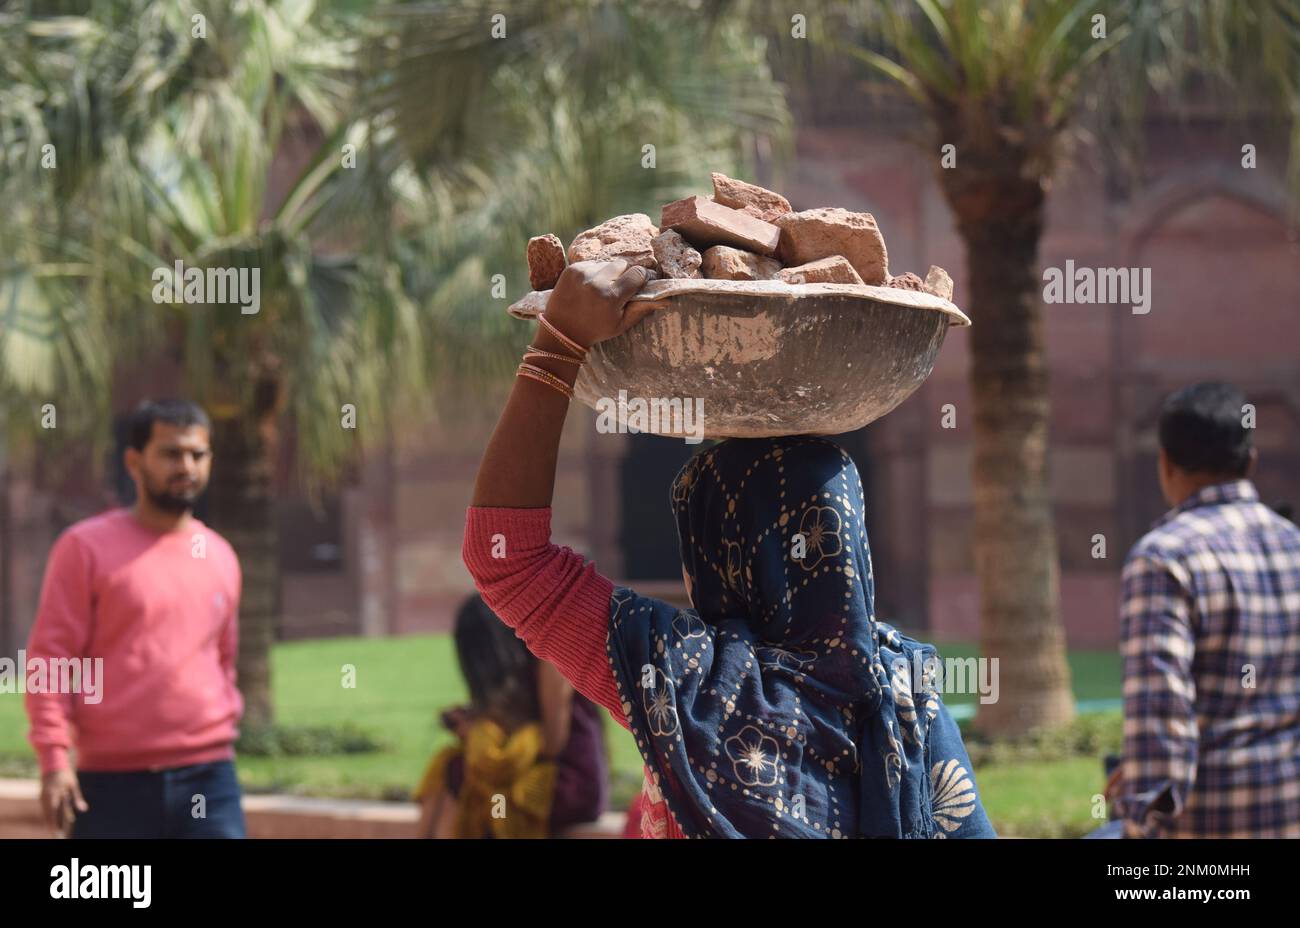 A female labourer carrying a basket of bricks on her head Stock Photo